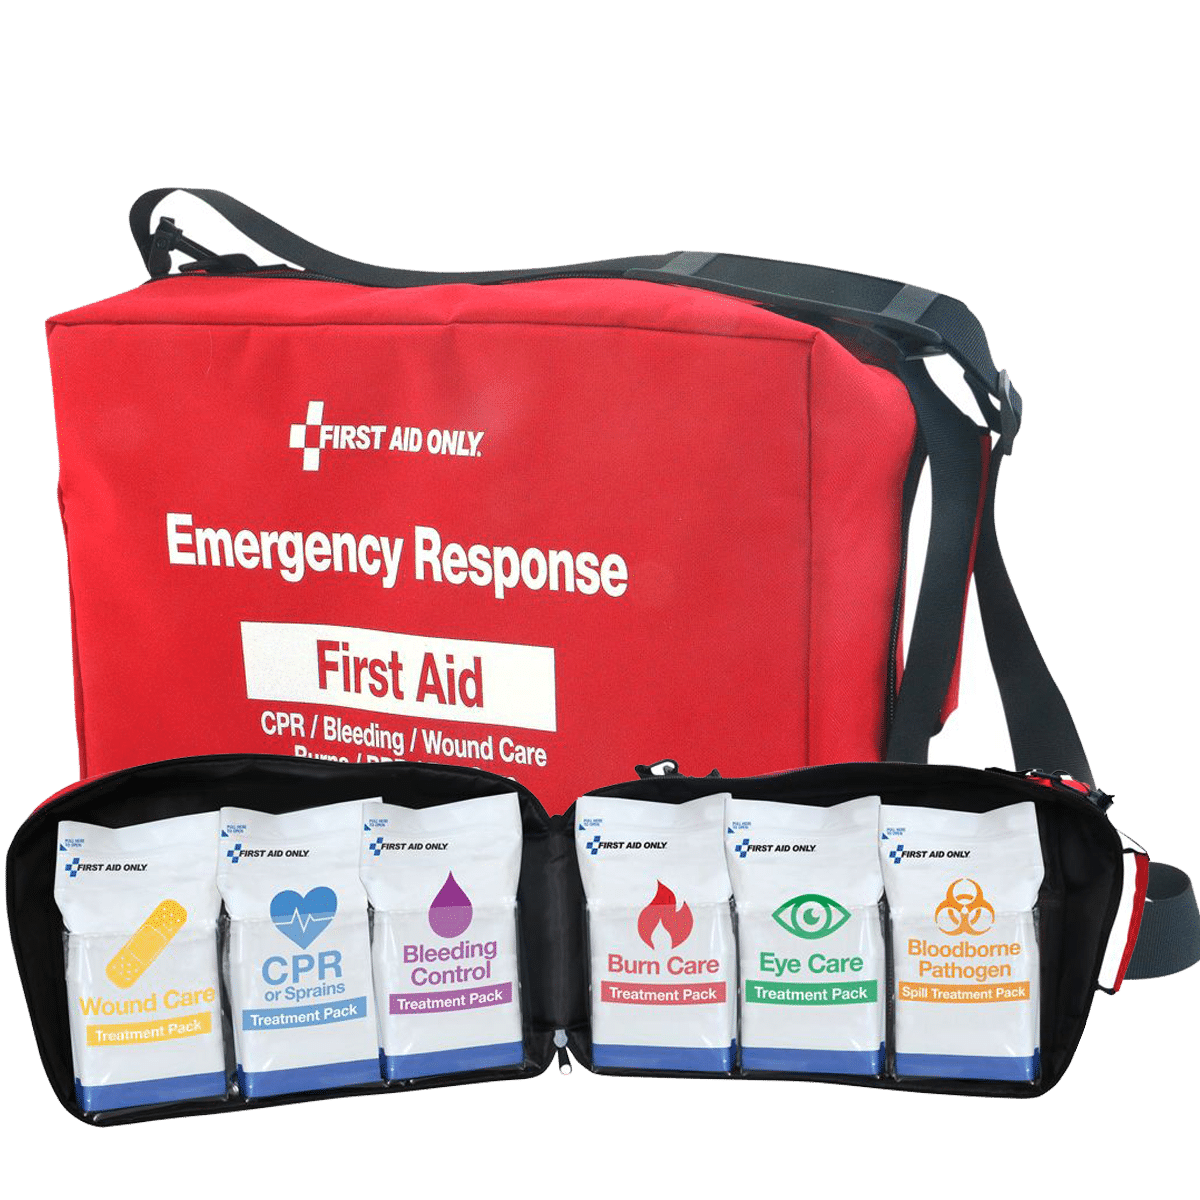 First Aid Only Emergency Response Module First Aid Kit Bag -91170 - Full  Compliance Safety